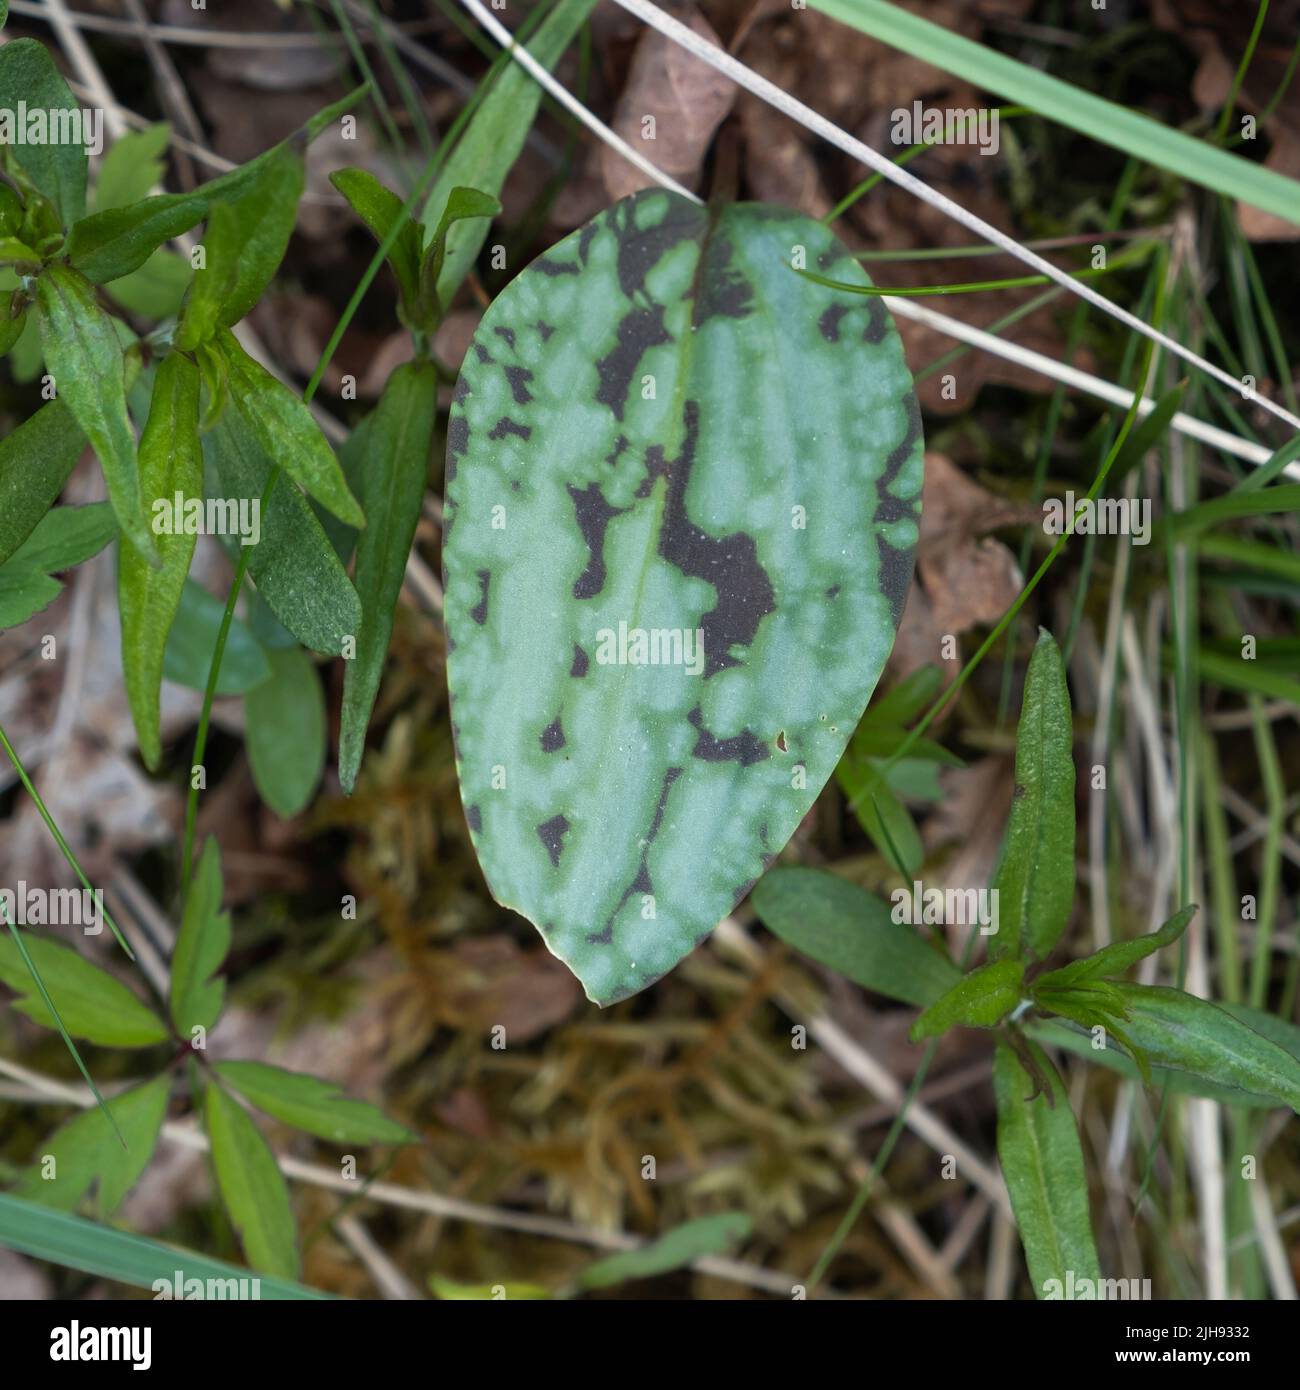 Dog tooth violet (Erythronium dens-canis) green leaf with dark brown stains Stock Photo